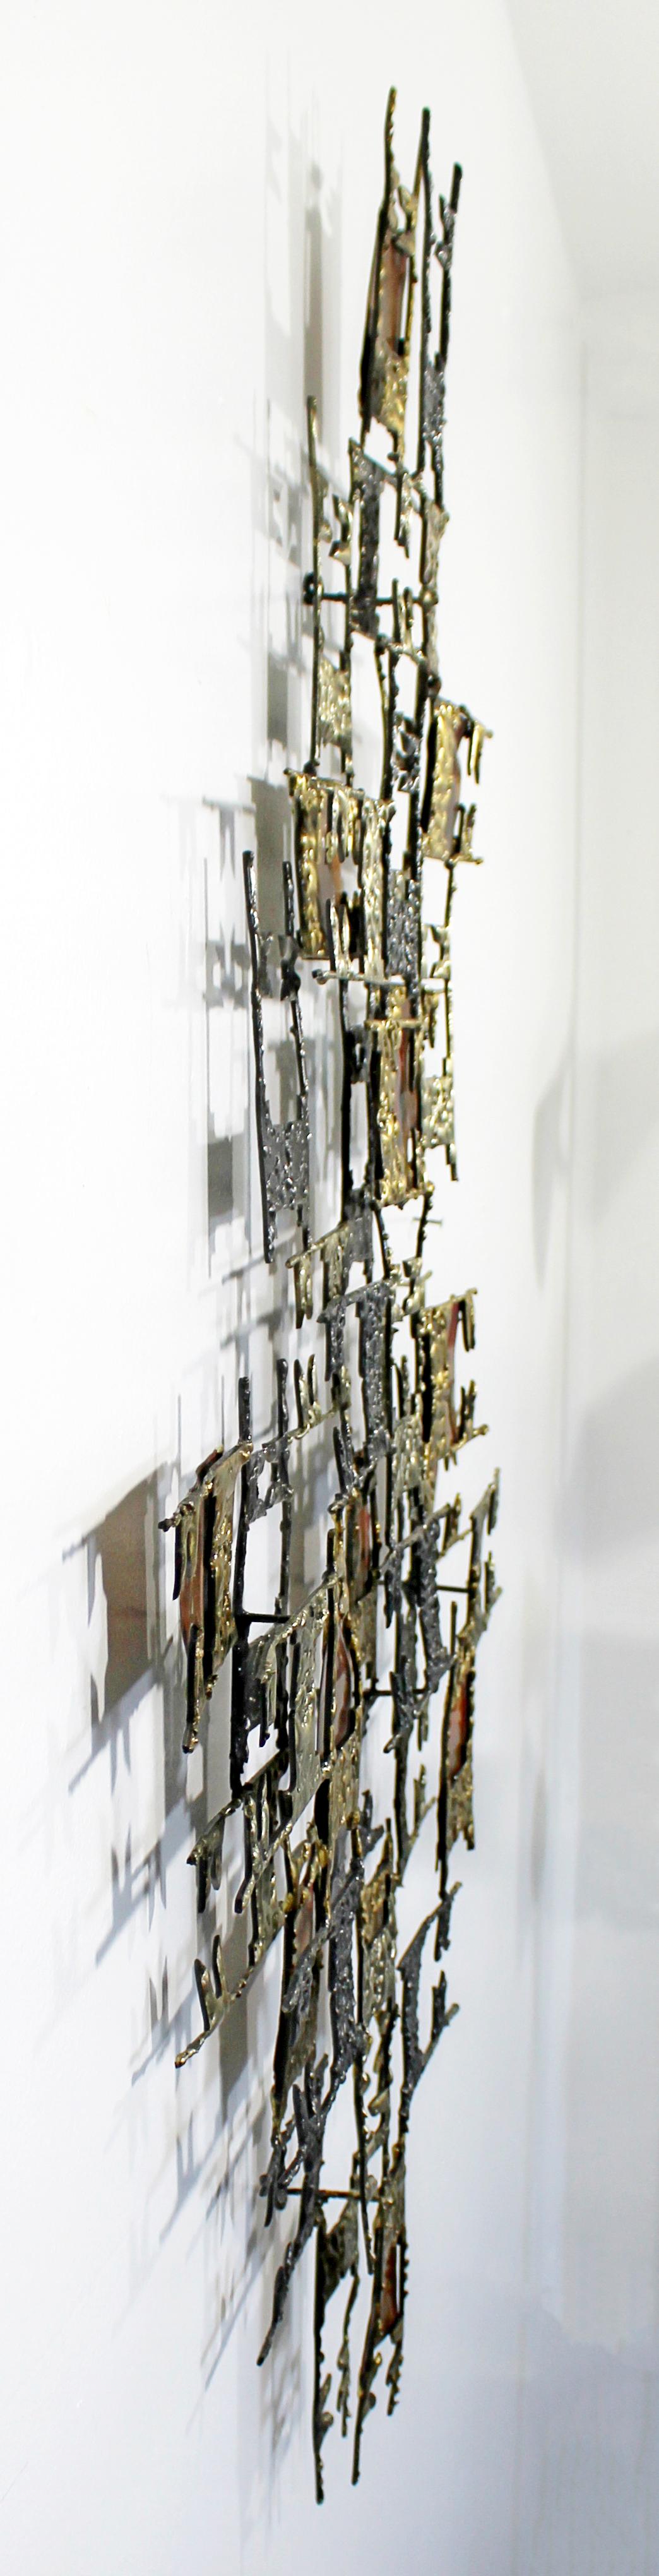 Late 20th Century Mid-Century Modern Brutalist Mixed Metal Abstract Wall Sculpture, 1970s